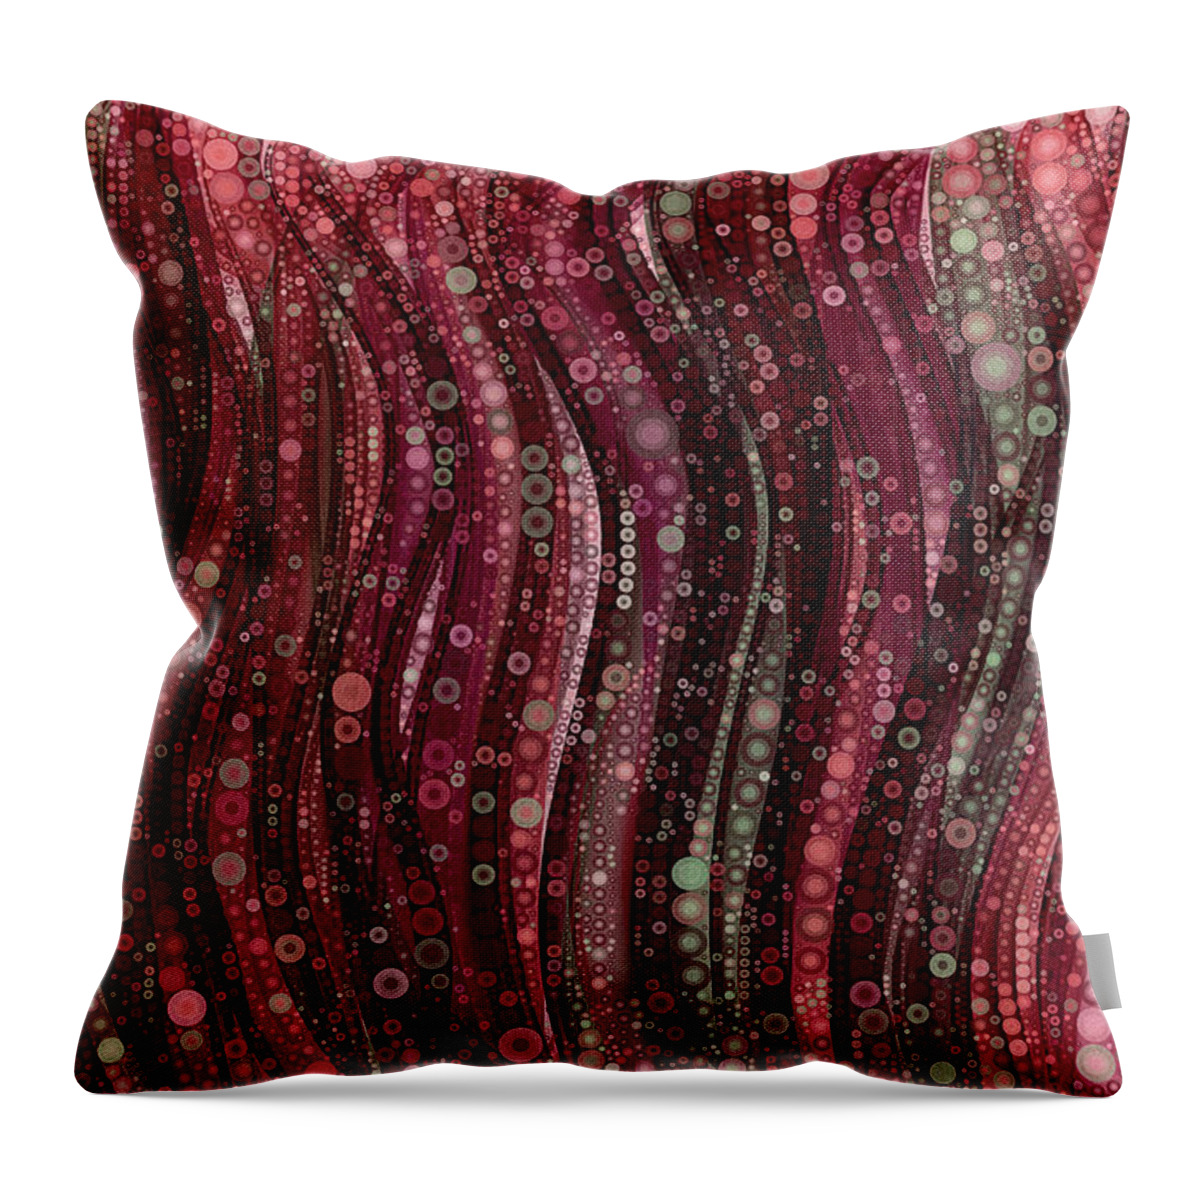 Red Abstracts Throw Pillow featuring the digital art Maroon and Burgundy Red Abstract Art by Peggy Collins